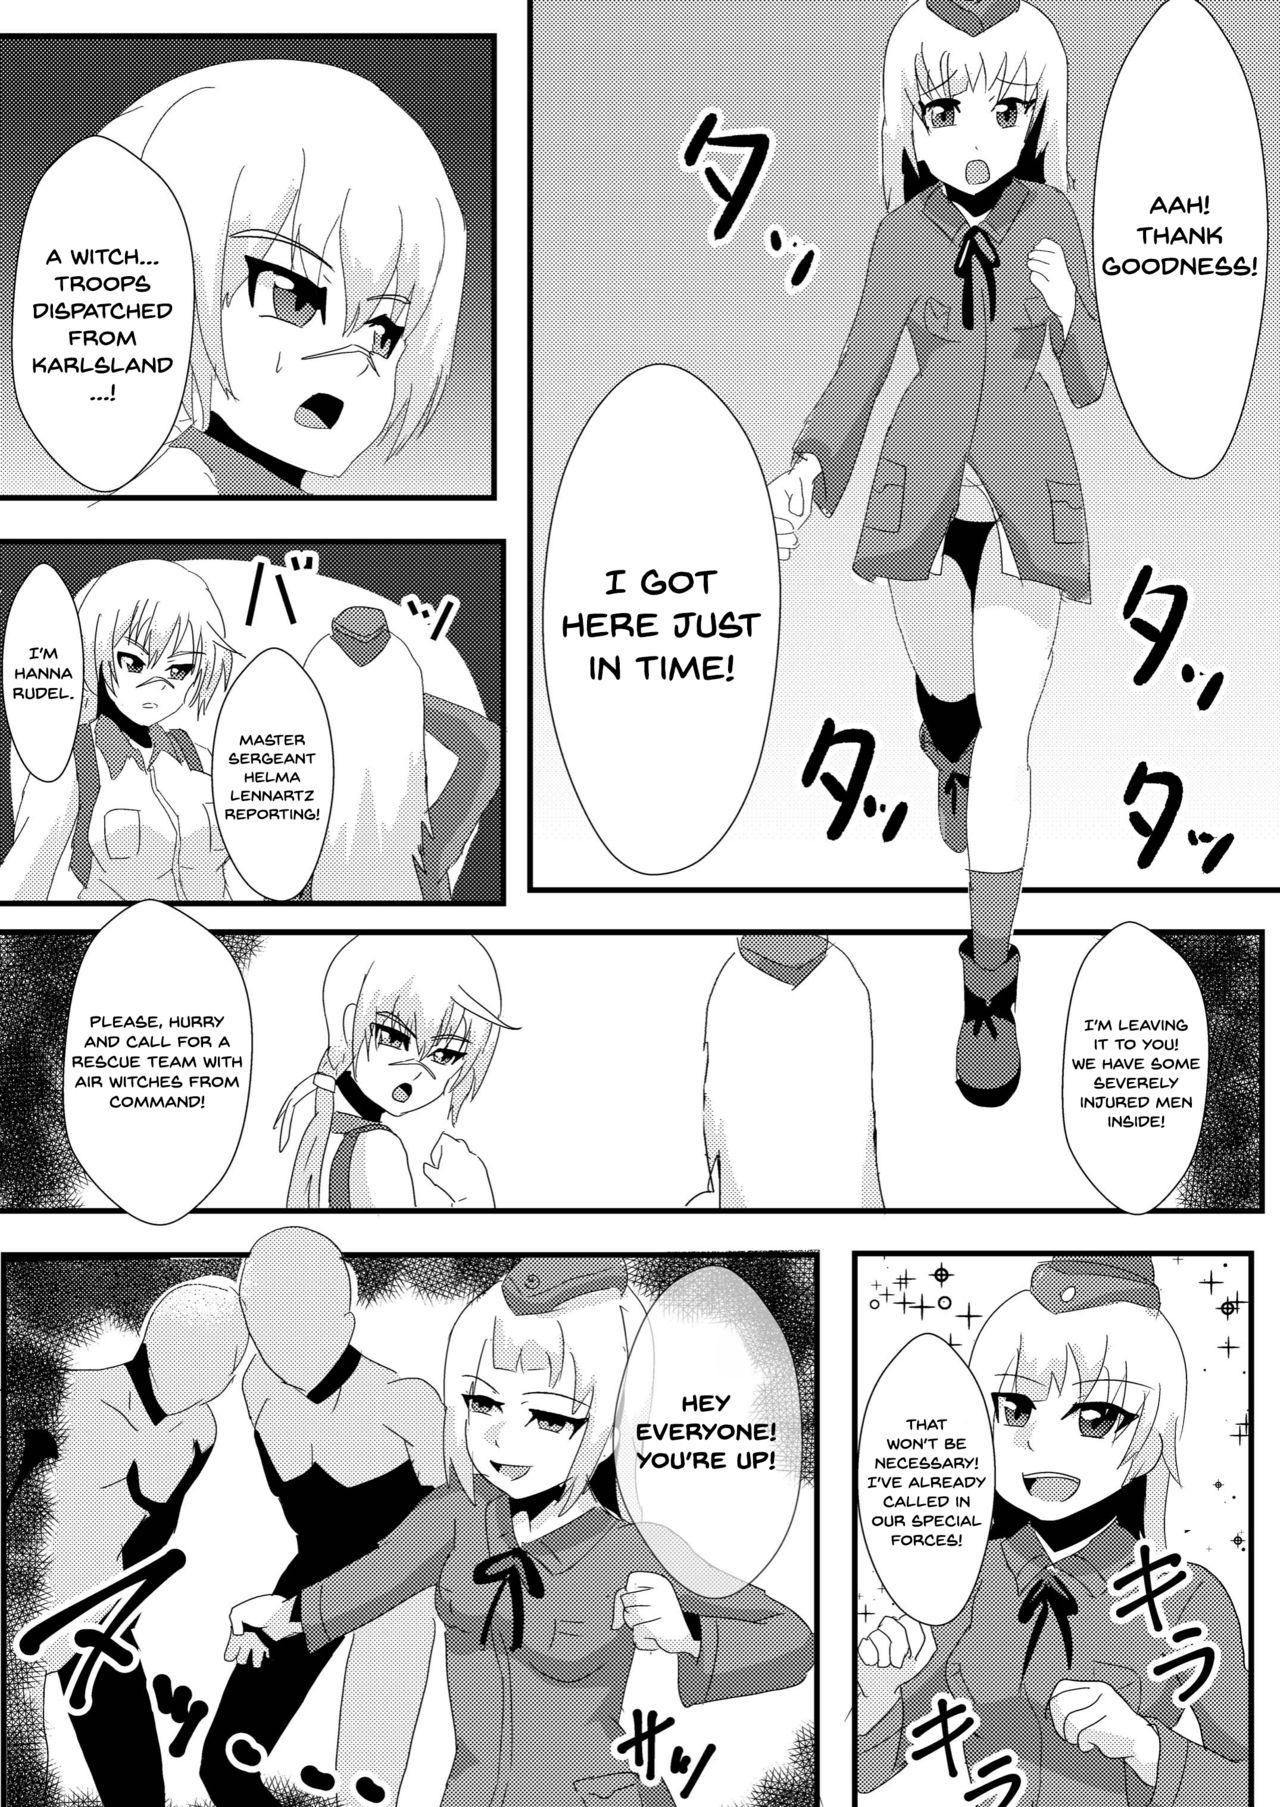 Little Parasite Witches 2 - Strike witches Gorgeous - Page 7